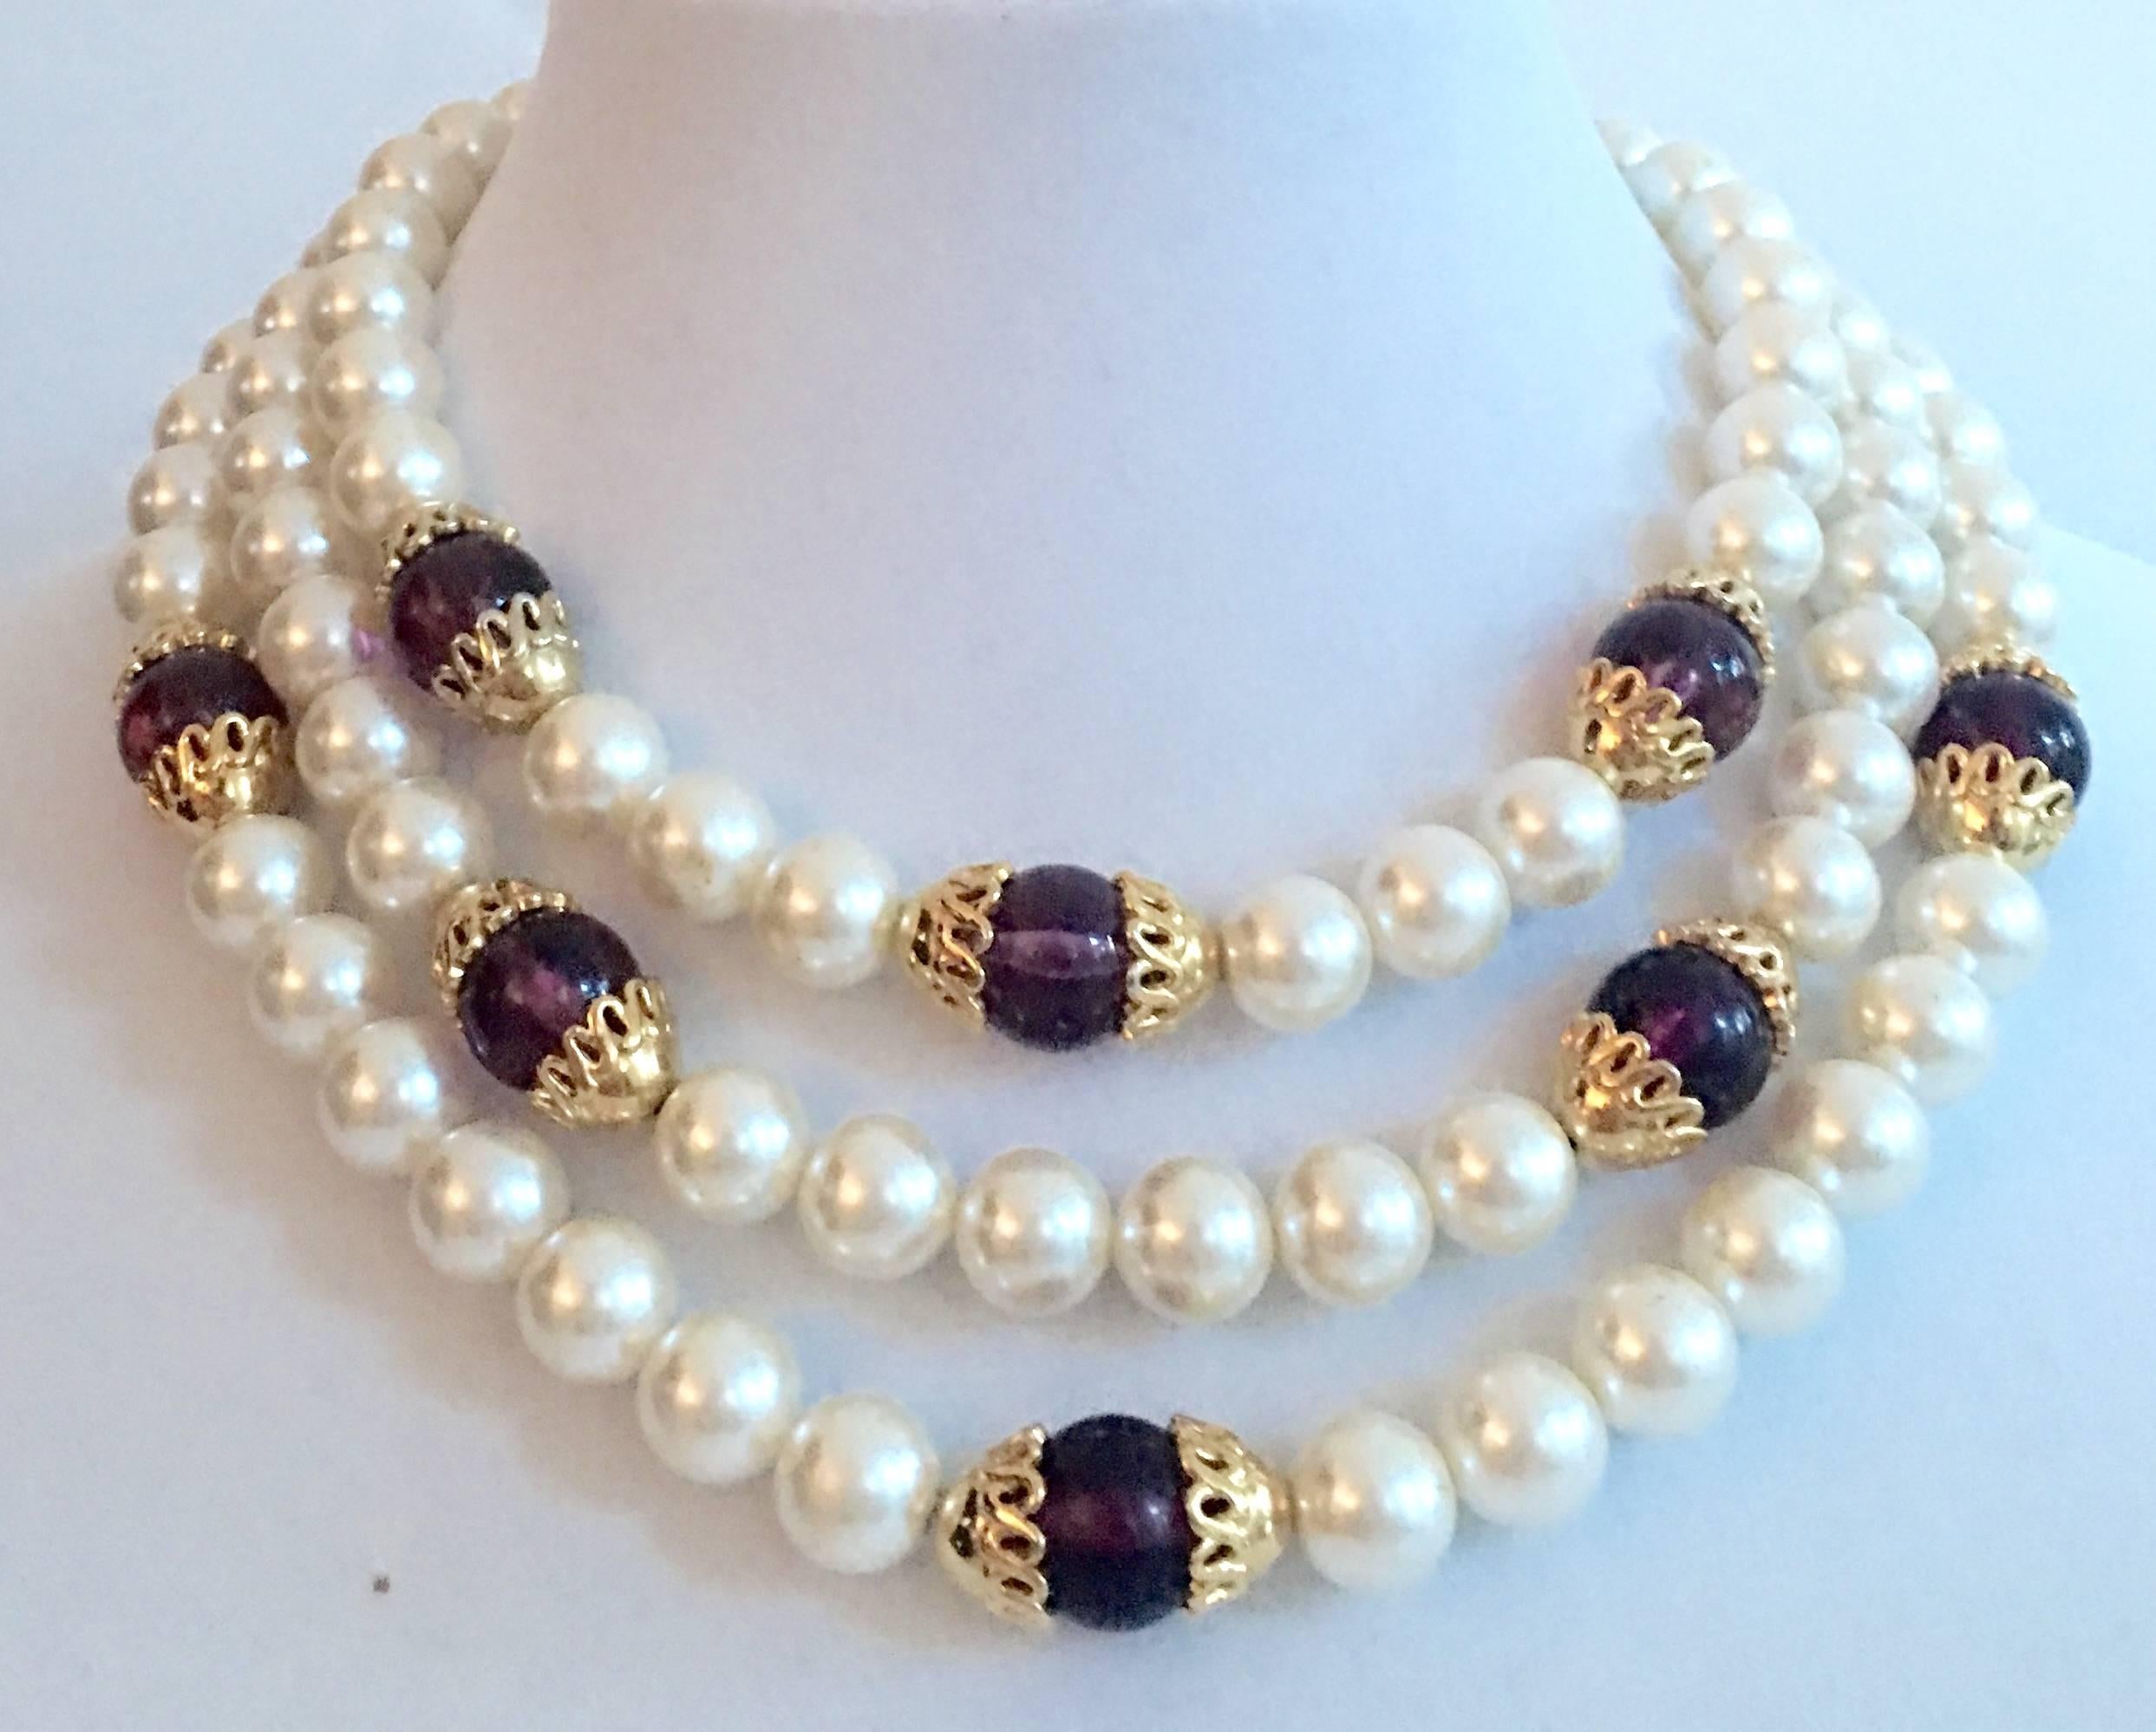 1990'S Napier triple strand faux pearl and amethyst round glass bead with gold tone detail choker necklace by, Napier. Each bead is approximately .50